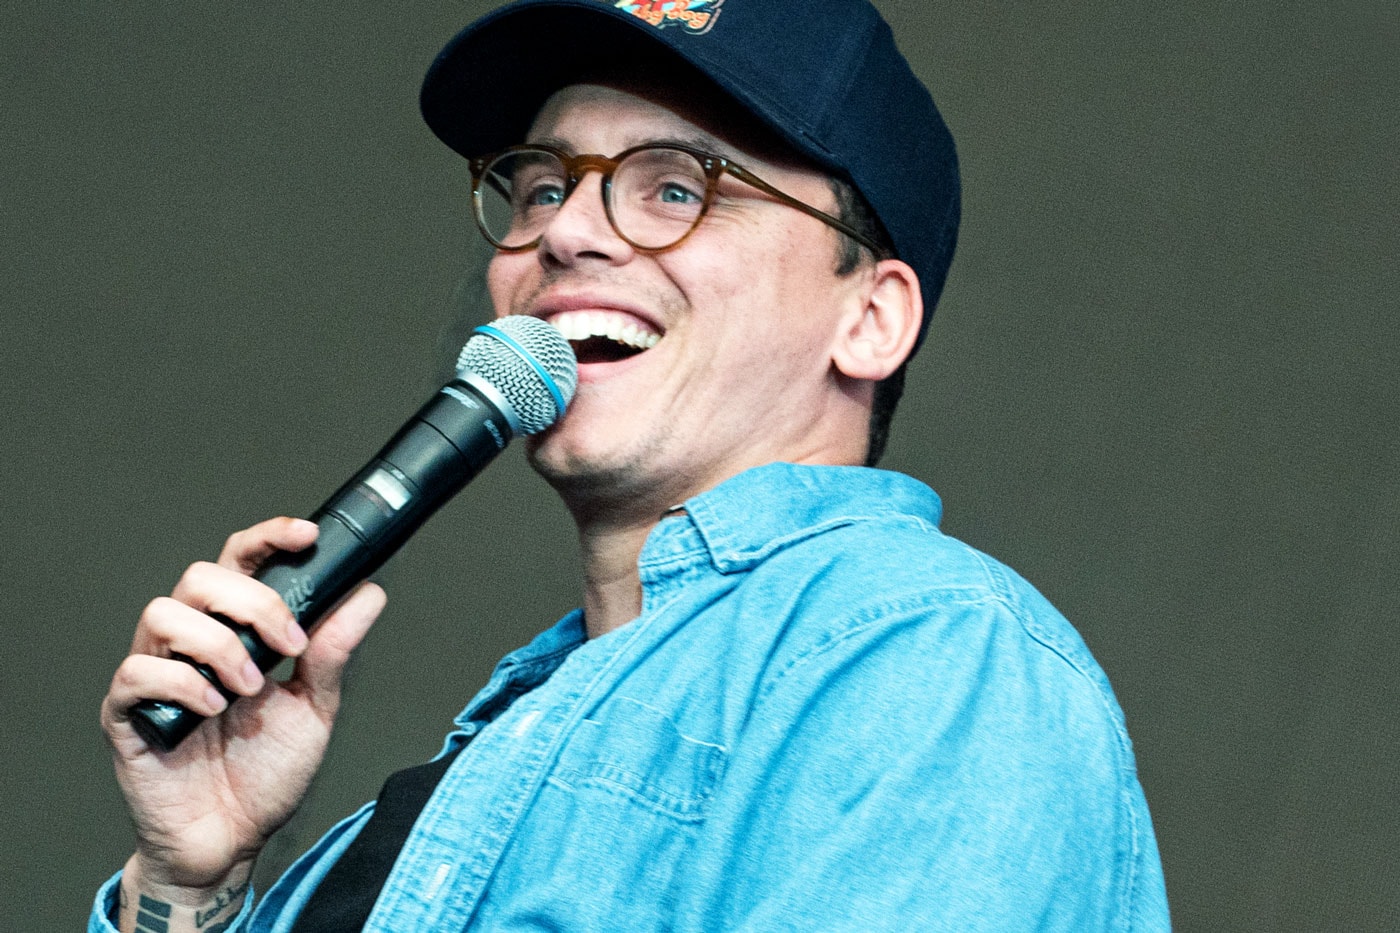 Logic Announces Release Date for Upcoming Album 'The Incredible True Story'